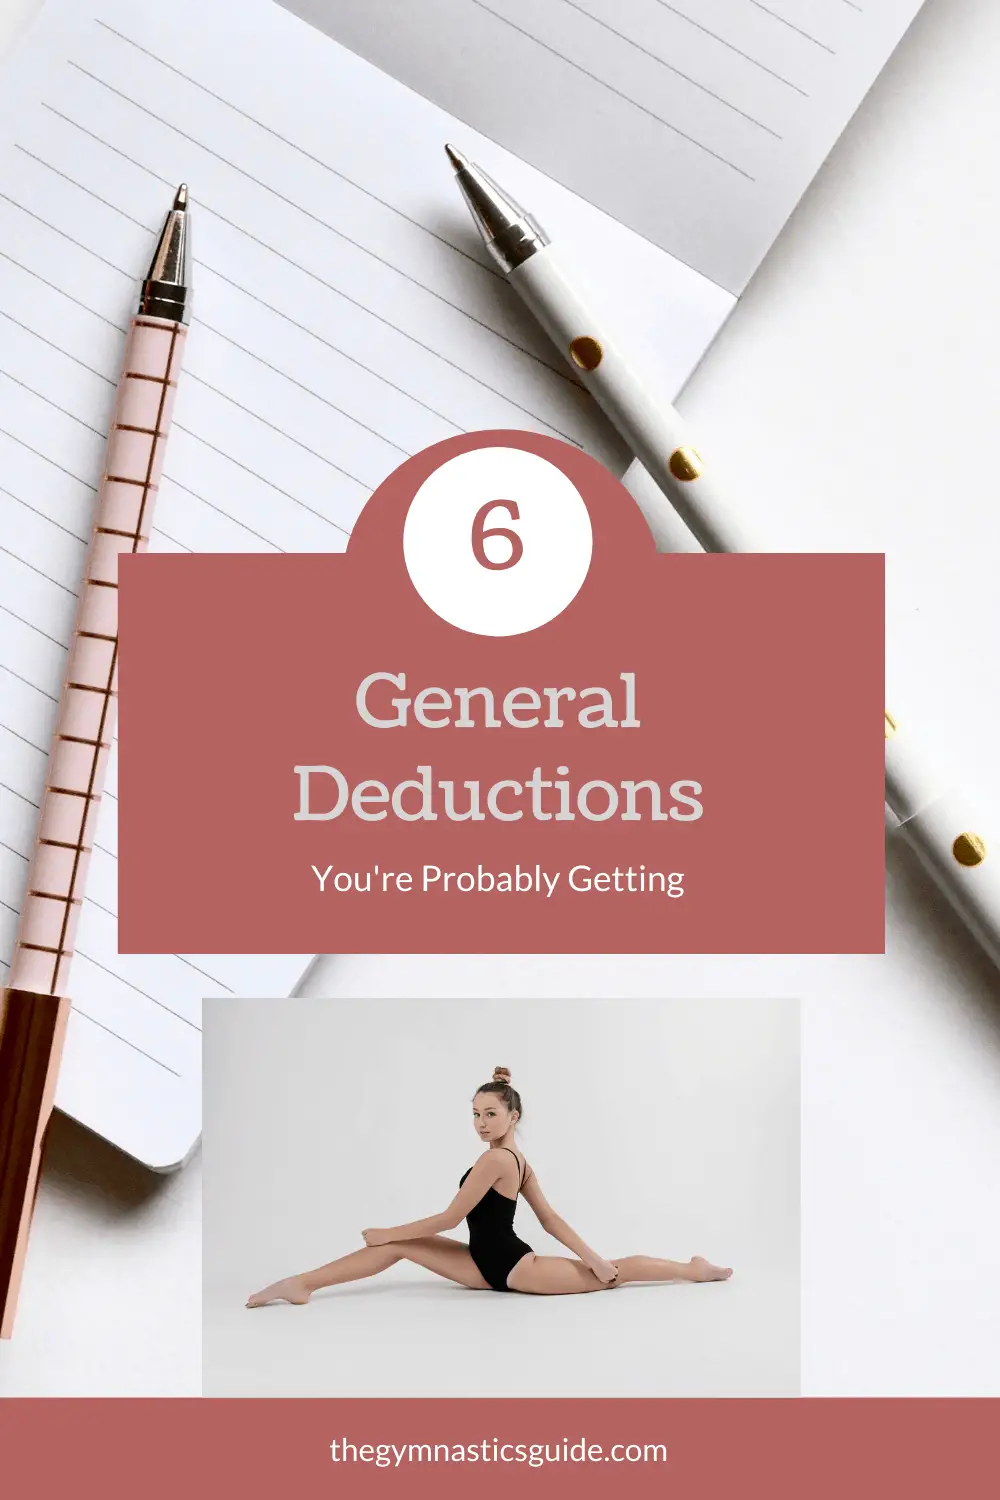 6 General Deductions You’re Probably Getting